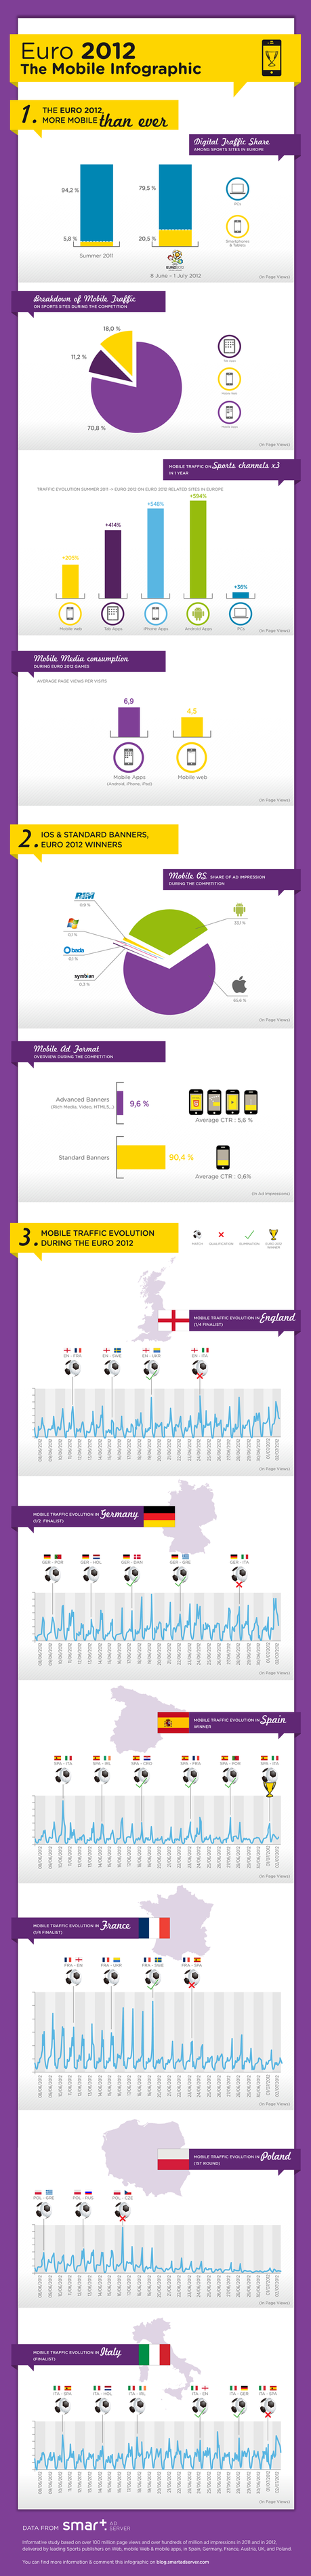 Euro 2012: The Mobile Infographic